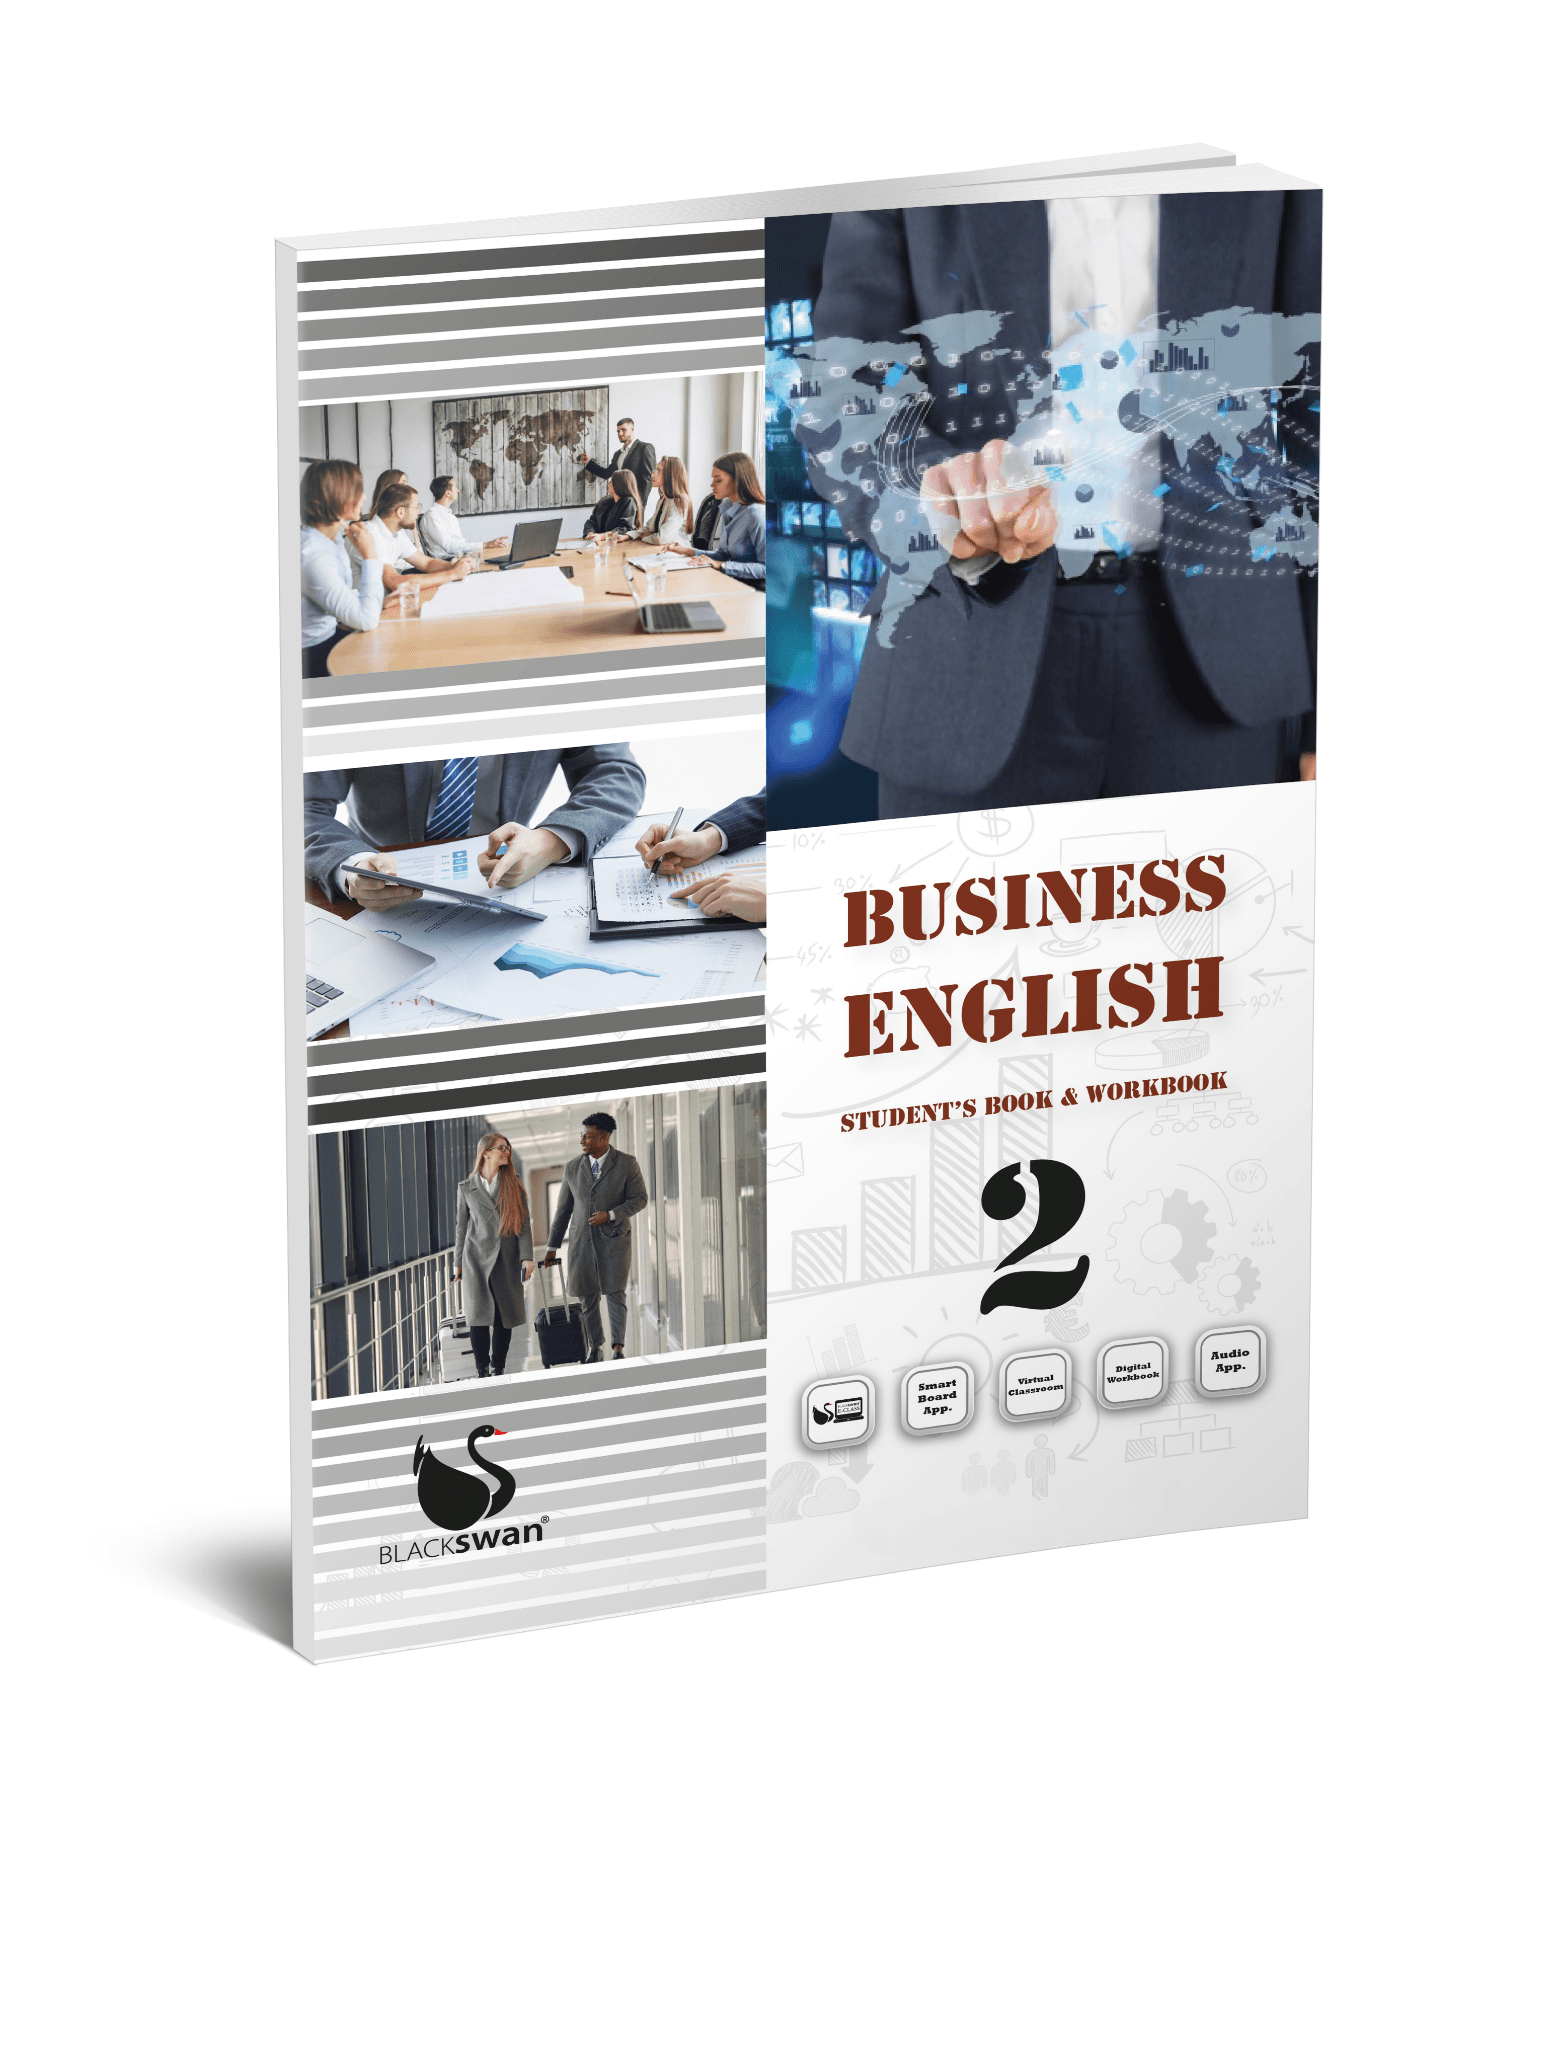 Business English 2 Student's Book & Workbook